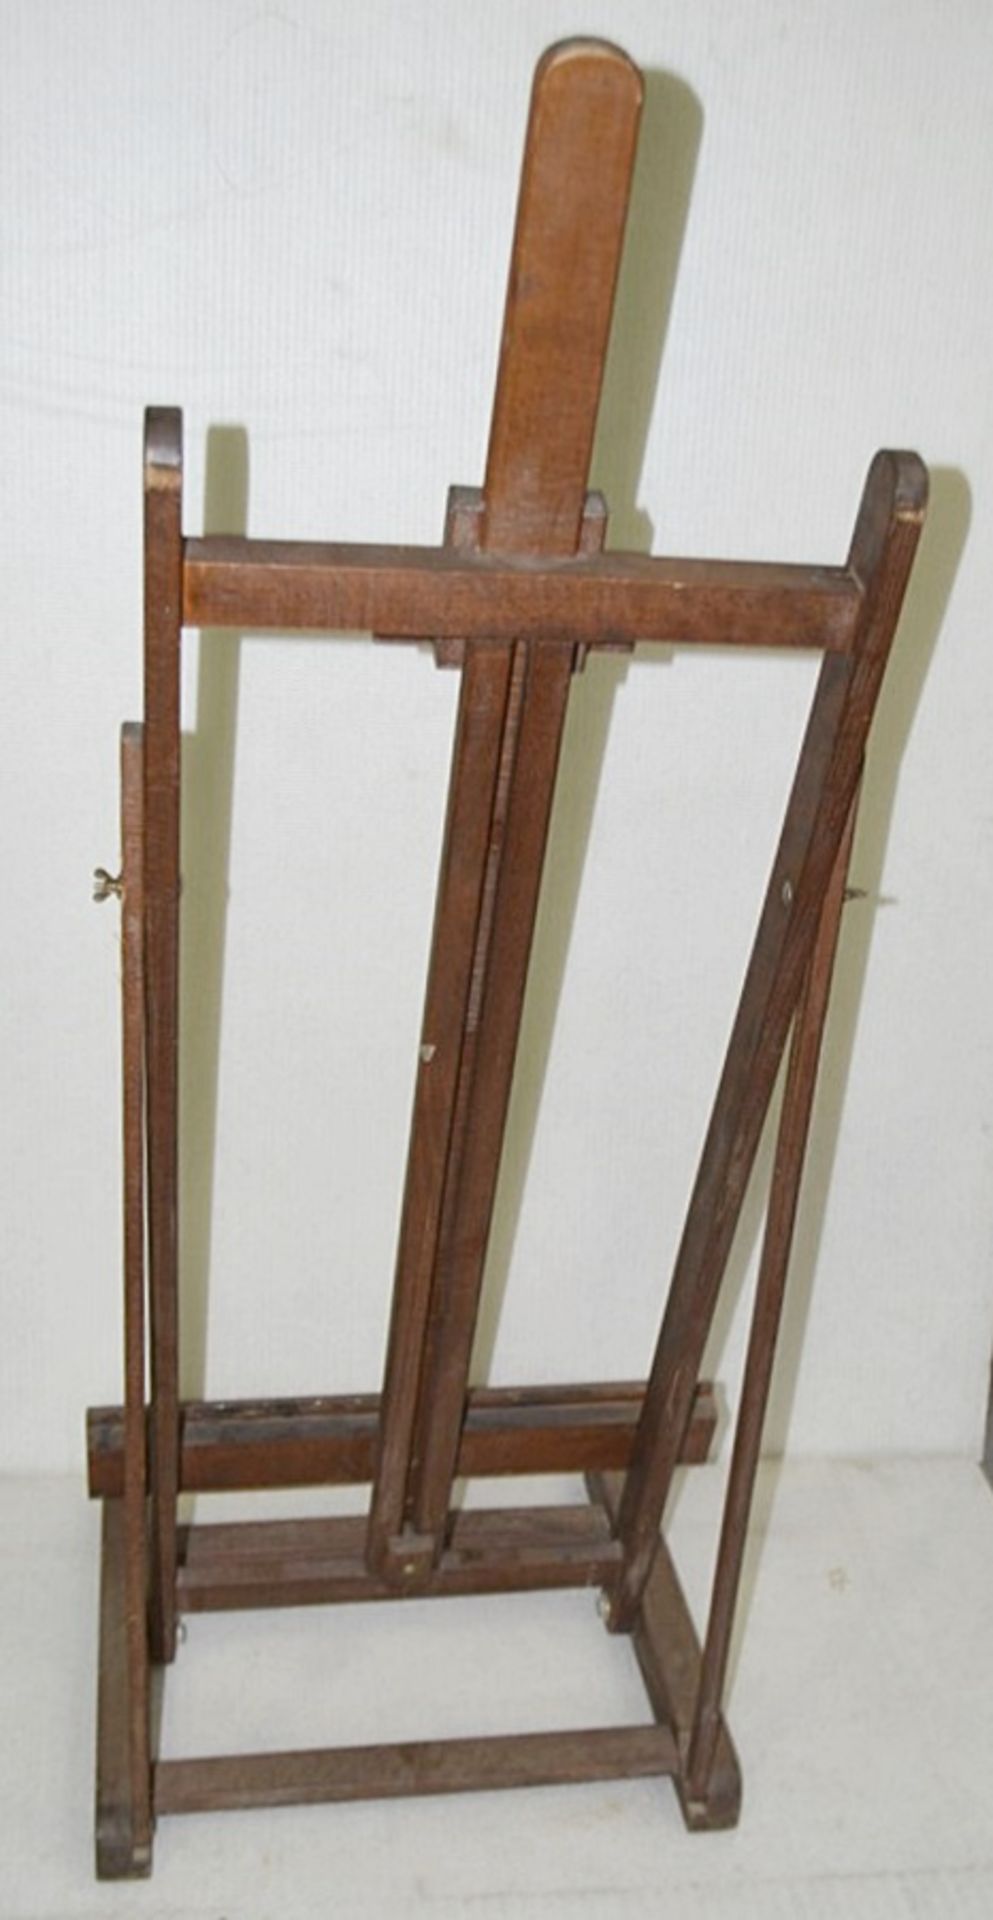 1 x Vintage Wooden Easel Display Prop - Dimensions (as pictured): H147 x W58 x D50cm - Ex-Showroom - Image 3 of 6